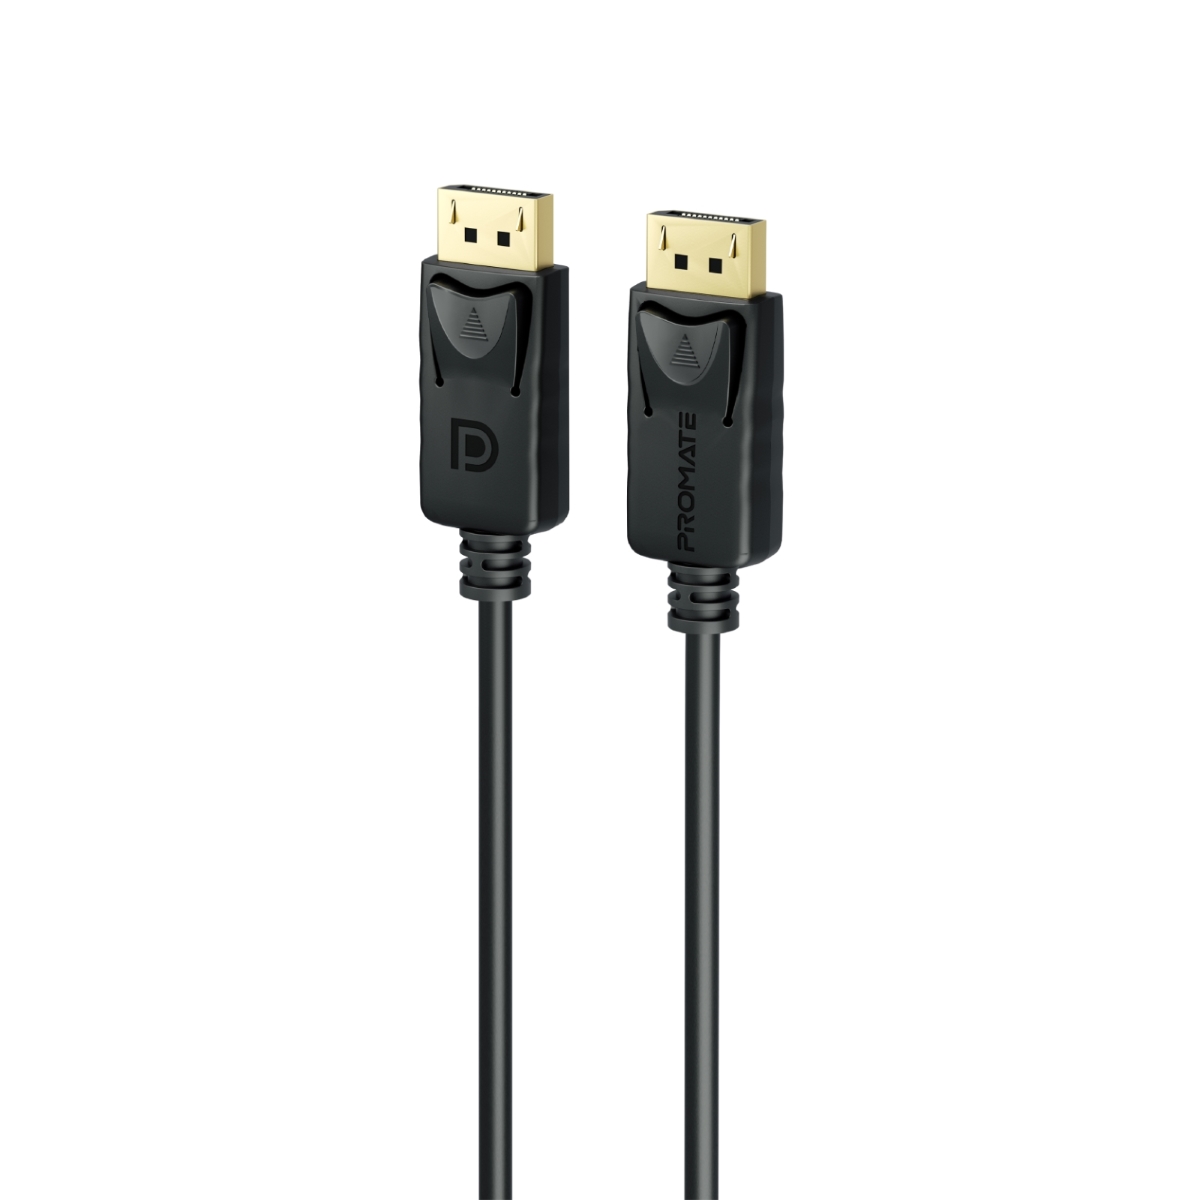 Promate DisplayPort Cable with HD 8K@60Hz Display, 32.4Gbps Bandwidth and 3m Slim Cable, DPLink-300